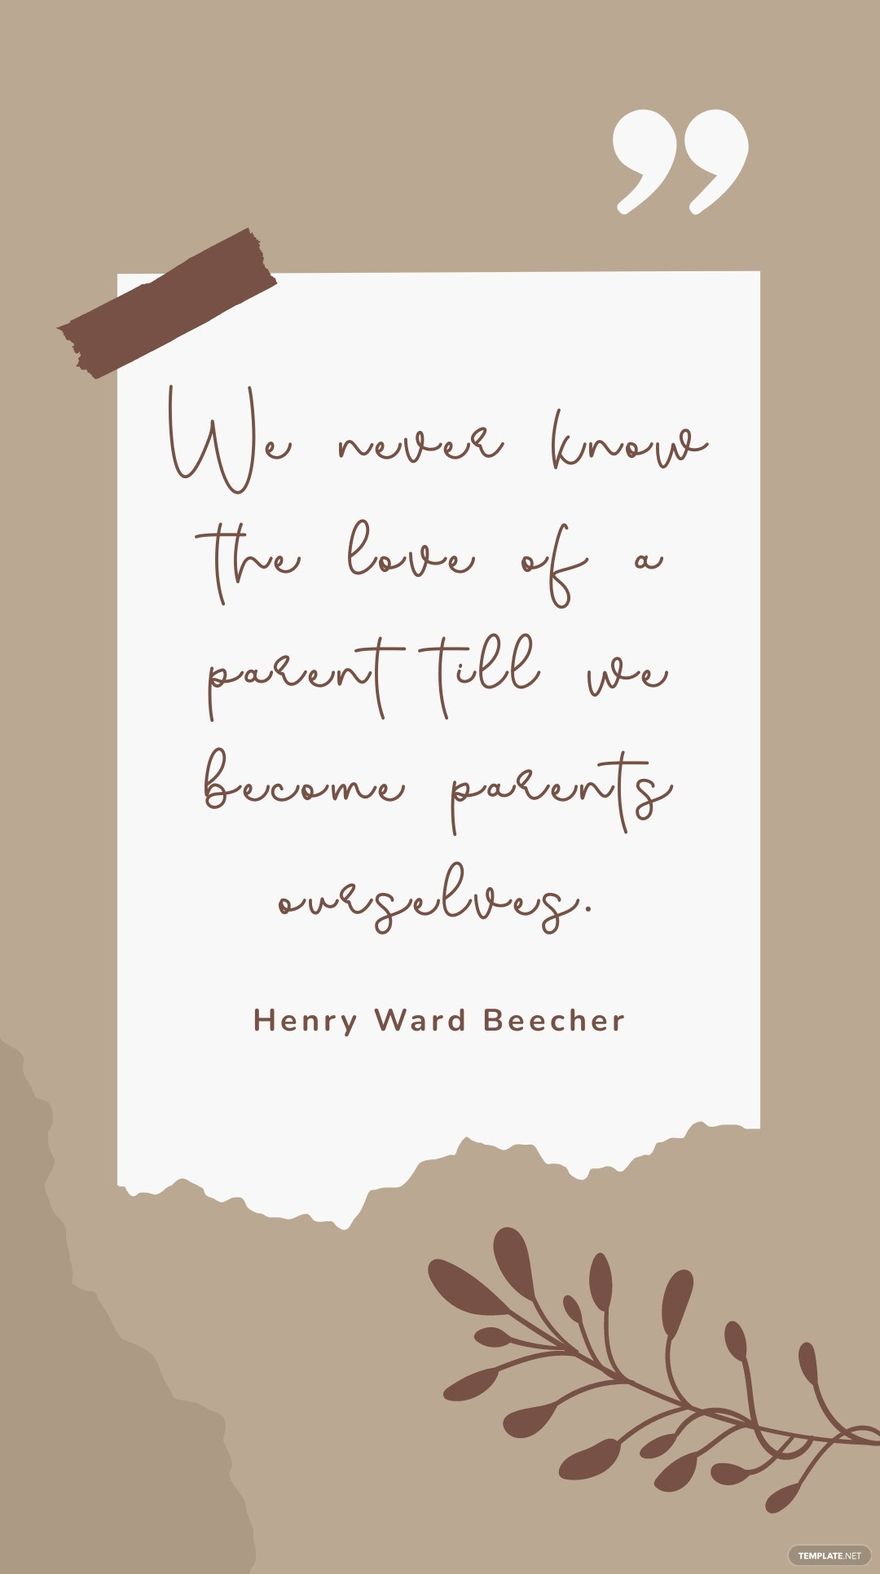 Henry Ward Beecher - We never know the love of a parent till we become parents ourselves.